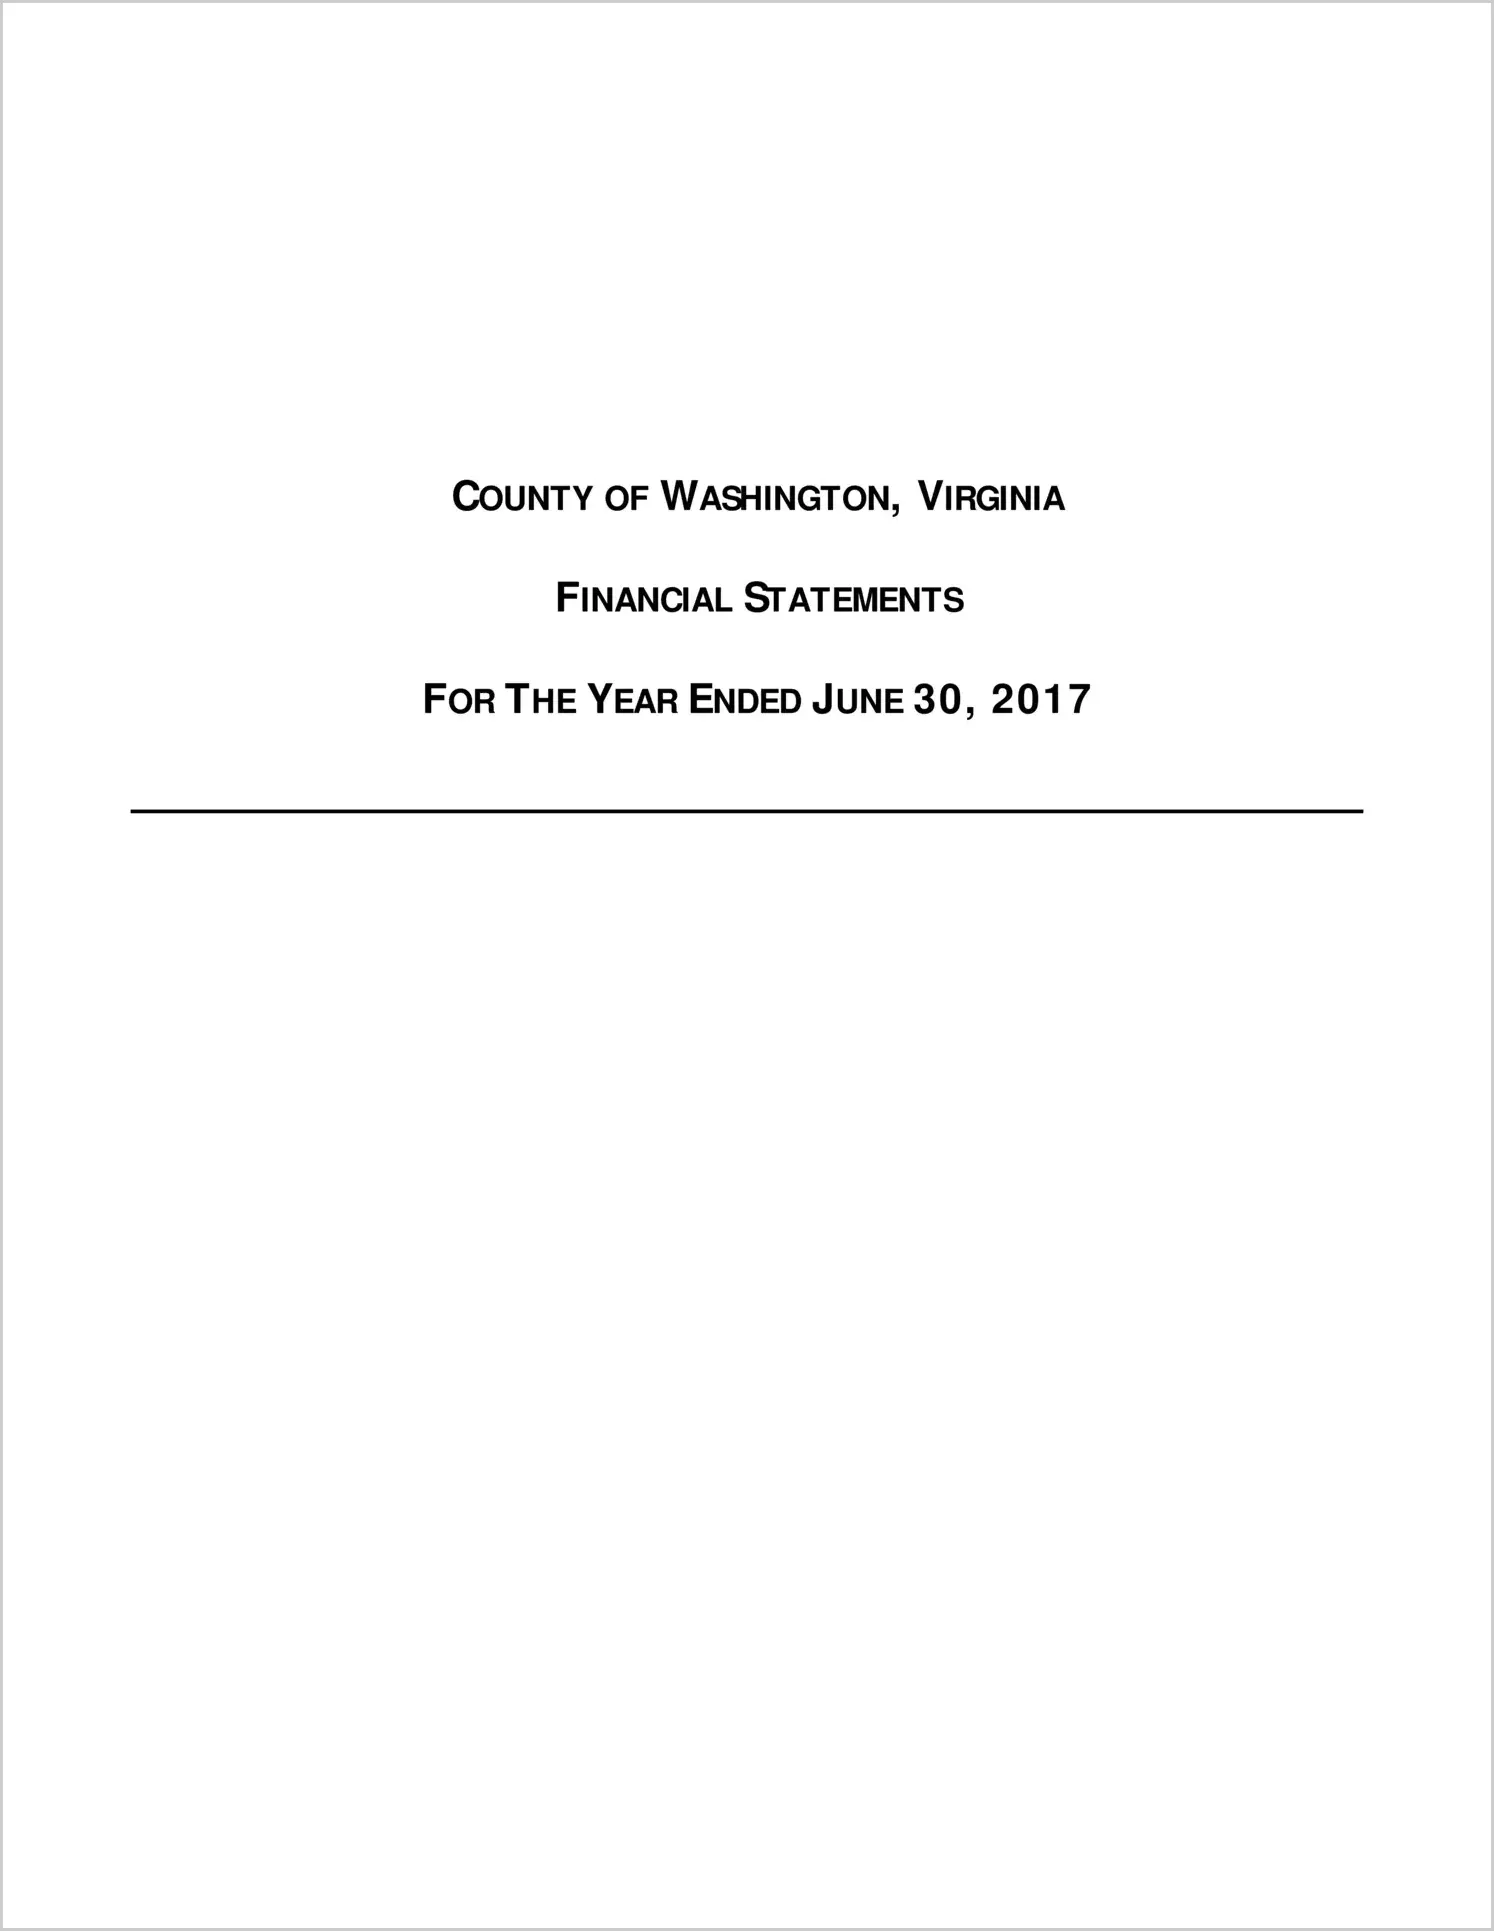 2017 Annual Financial Report for County of Washington